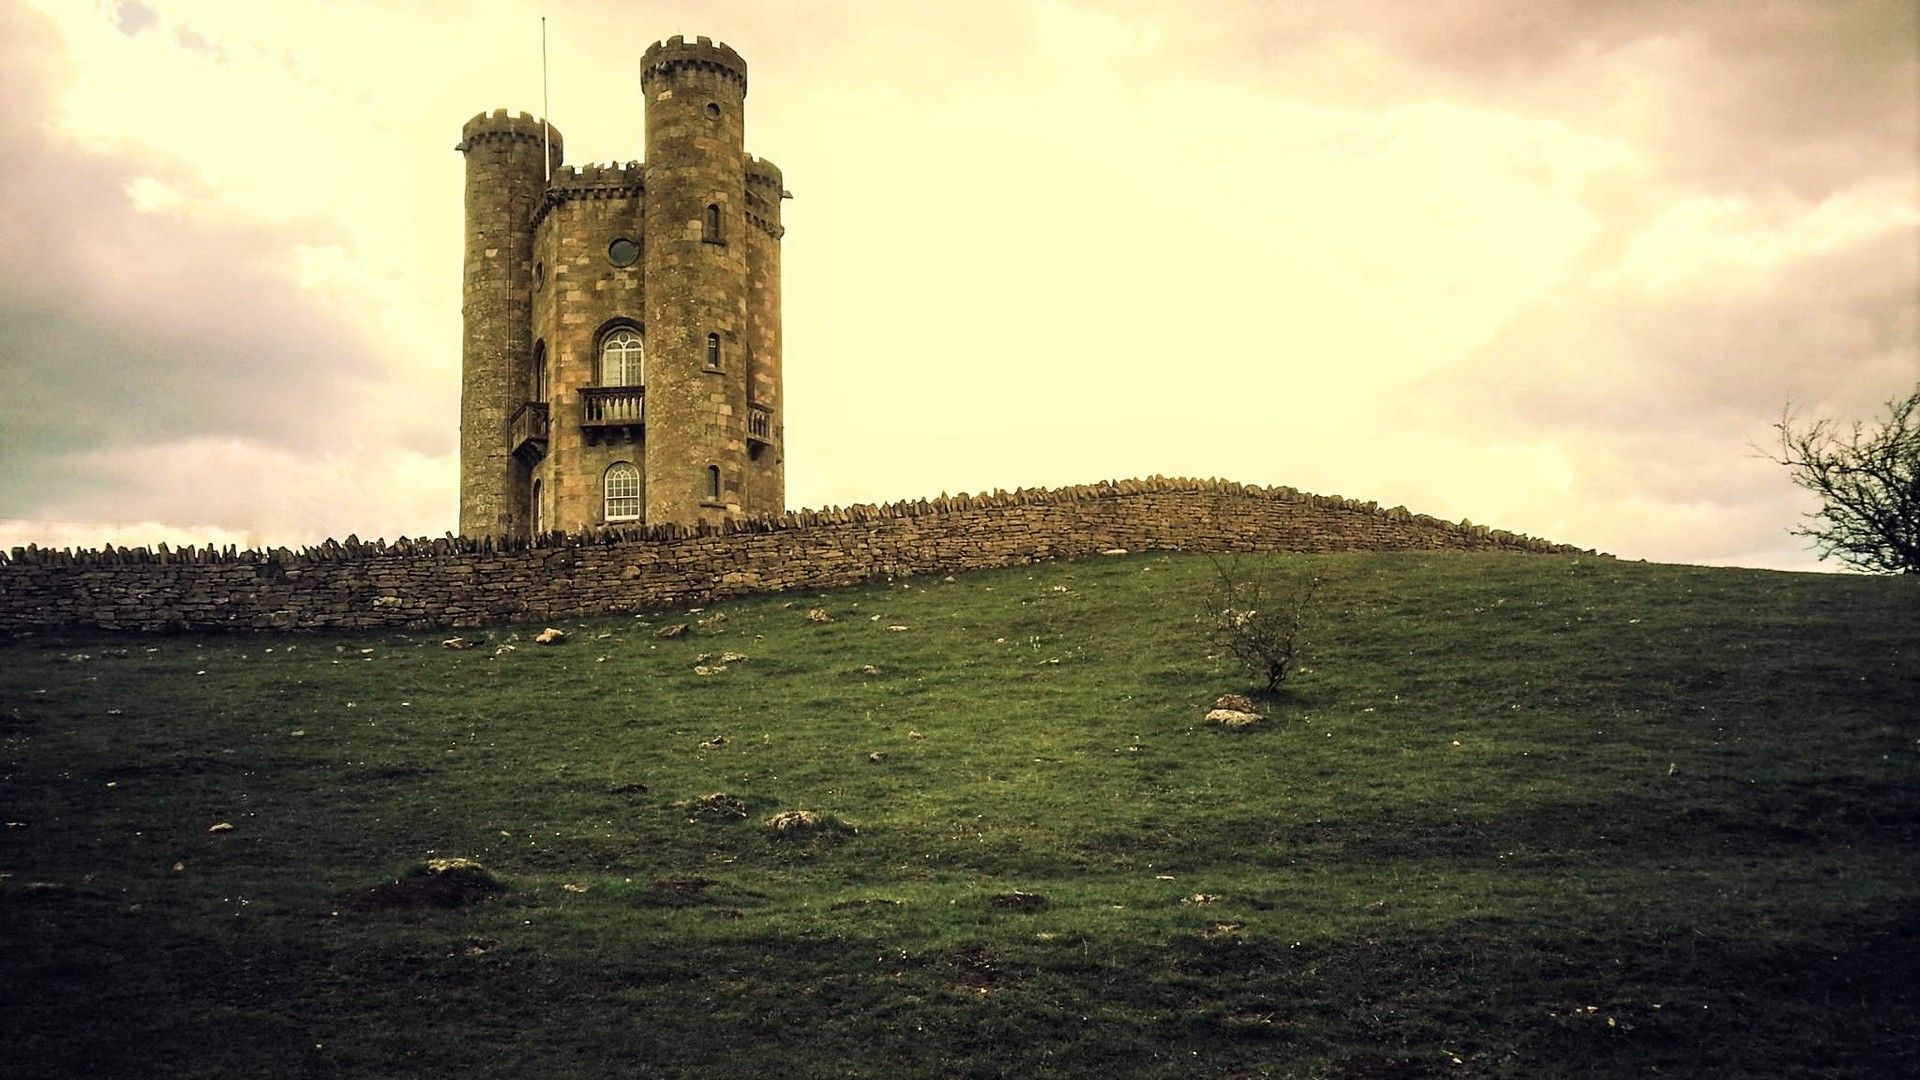 General 1920x1080 tower England old building architecture outdoors wall